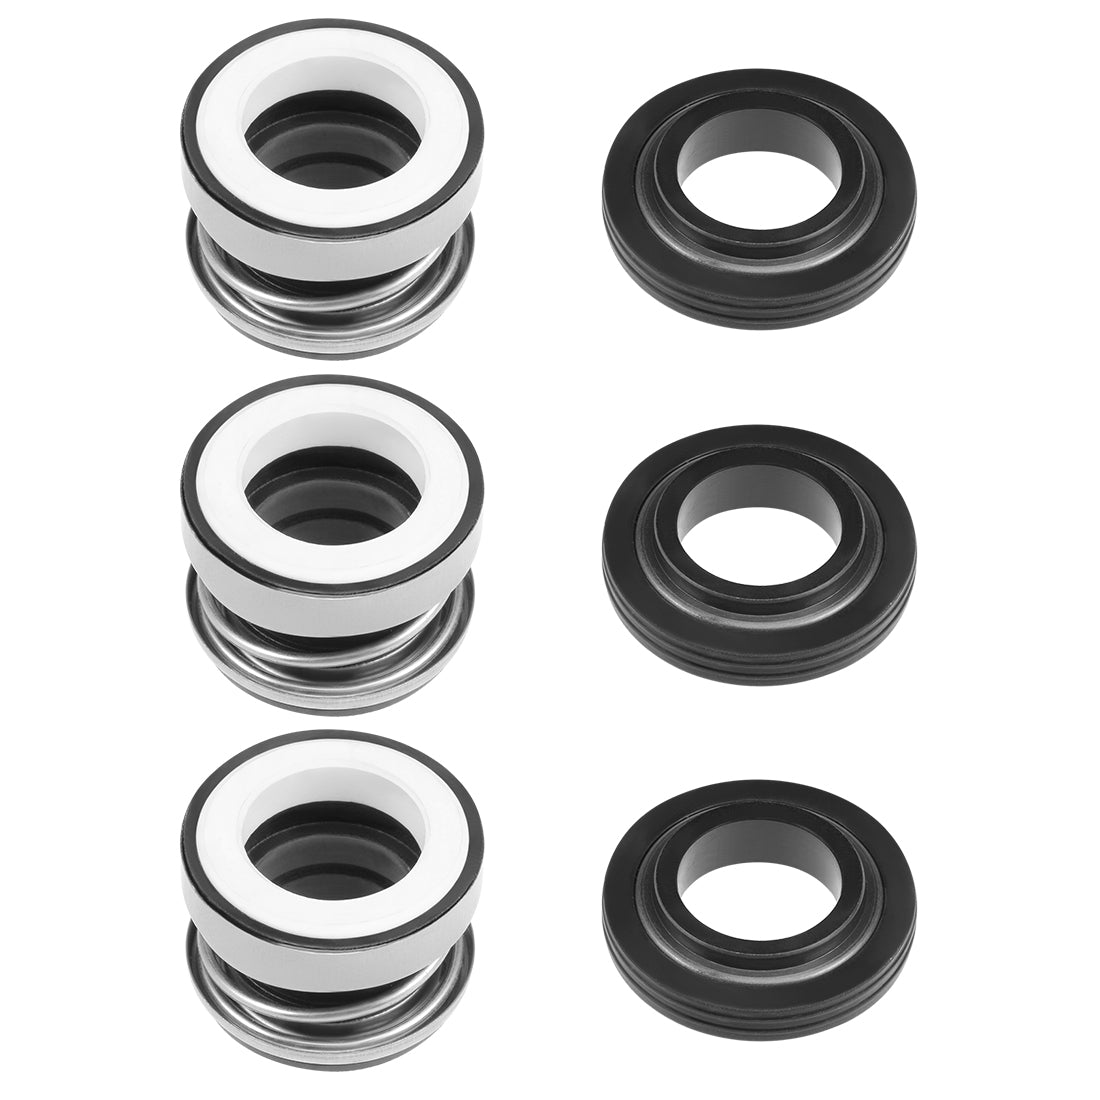 uxcell Uxcell Mechanical Shaft Seal Replacement for Pool Spa Pump 3pcs 103-12